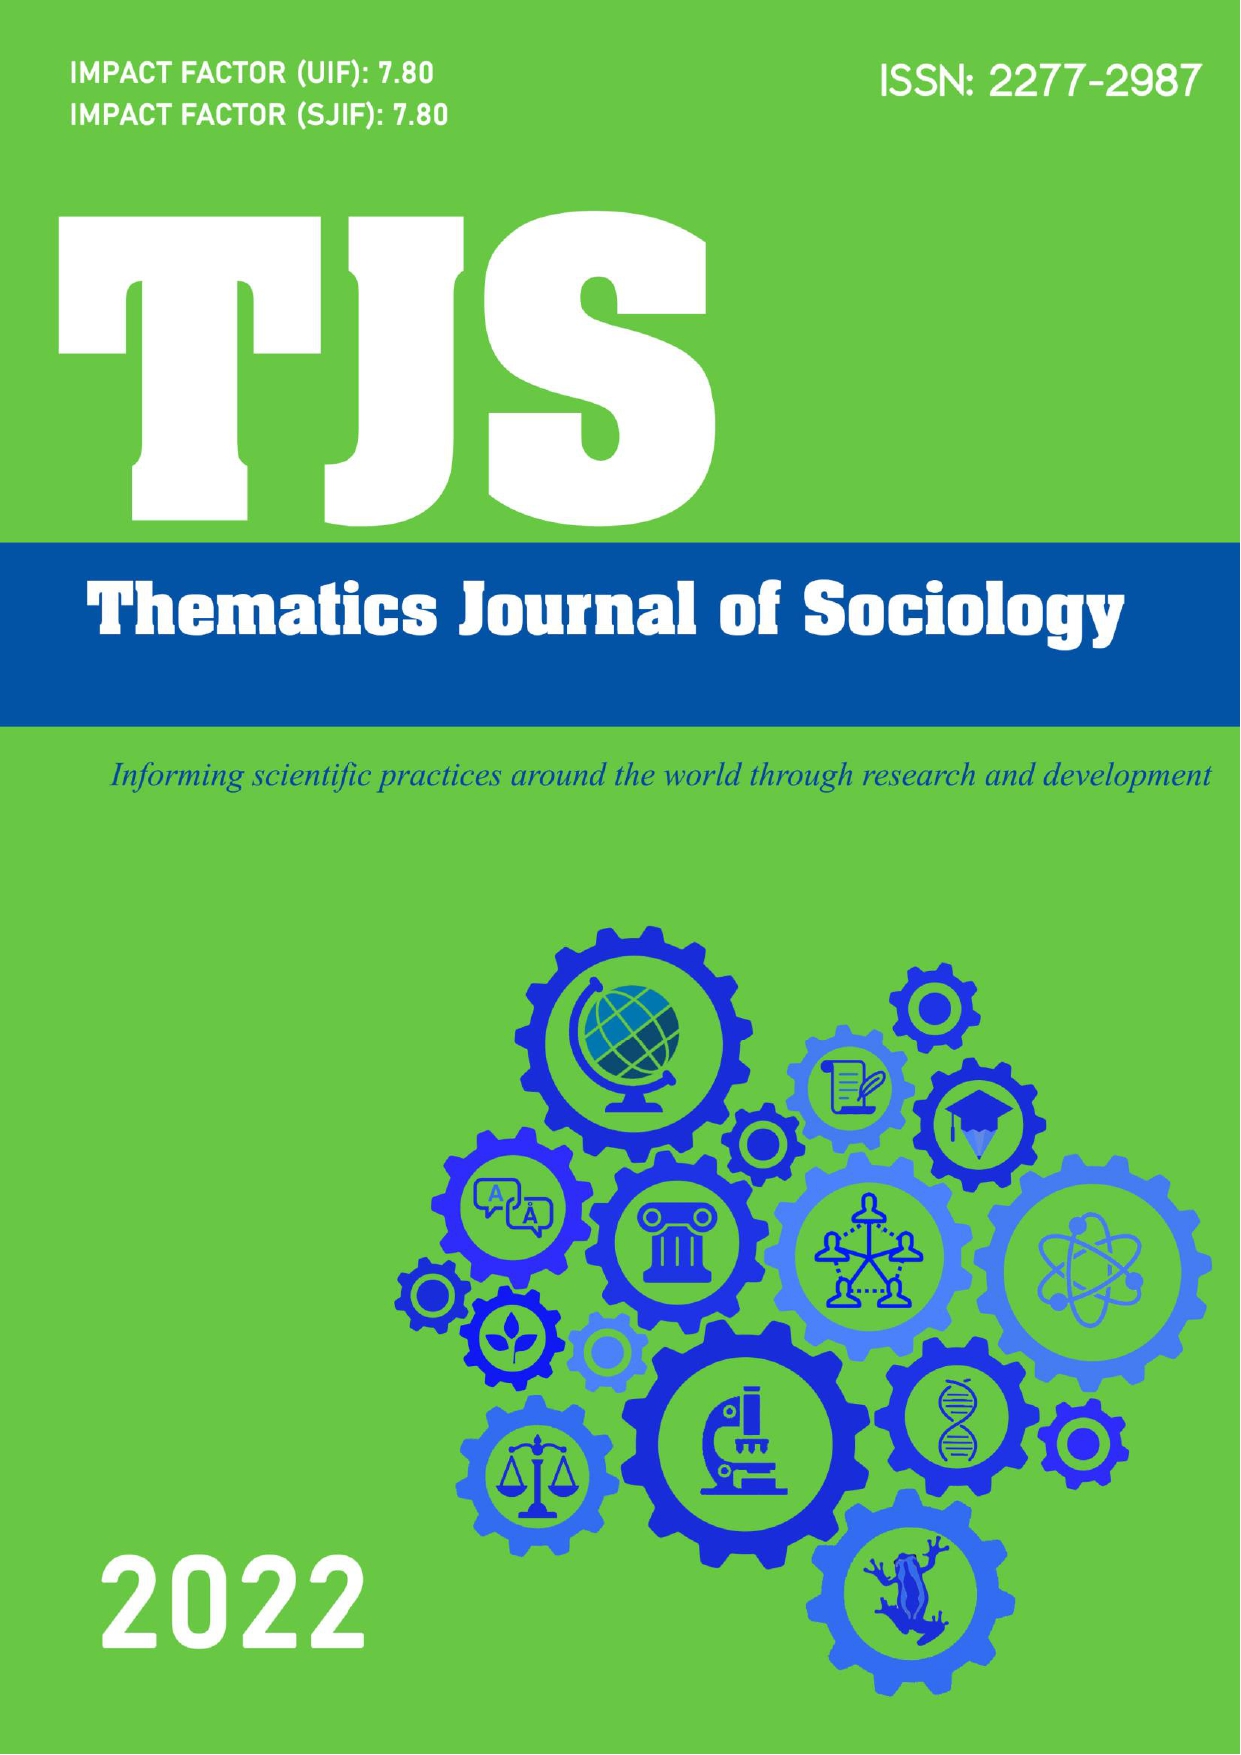 					View Vol. 6 No. 1 (2022): THEMATICS JOURNAL OF SOCIOLOGY
				